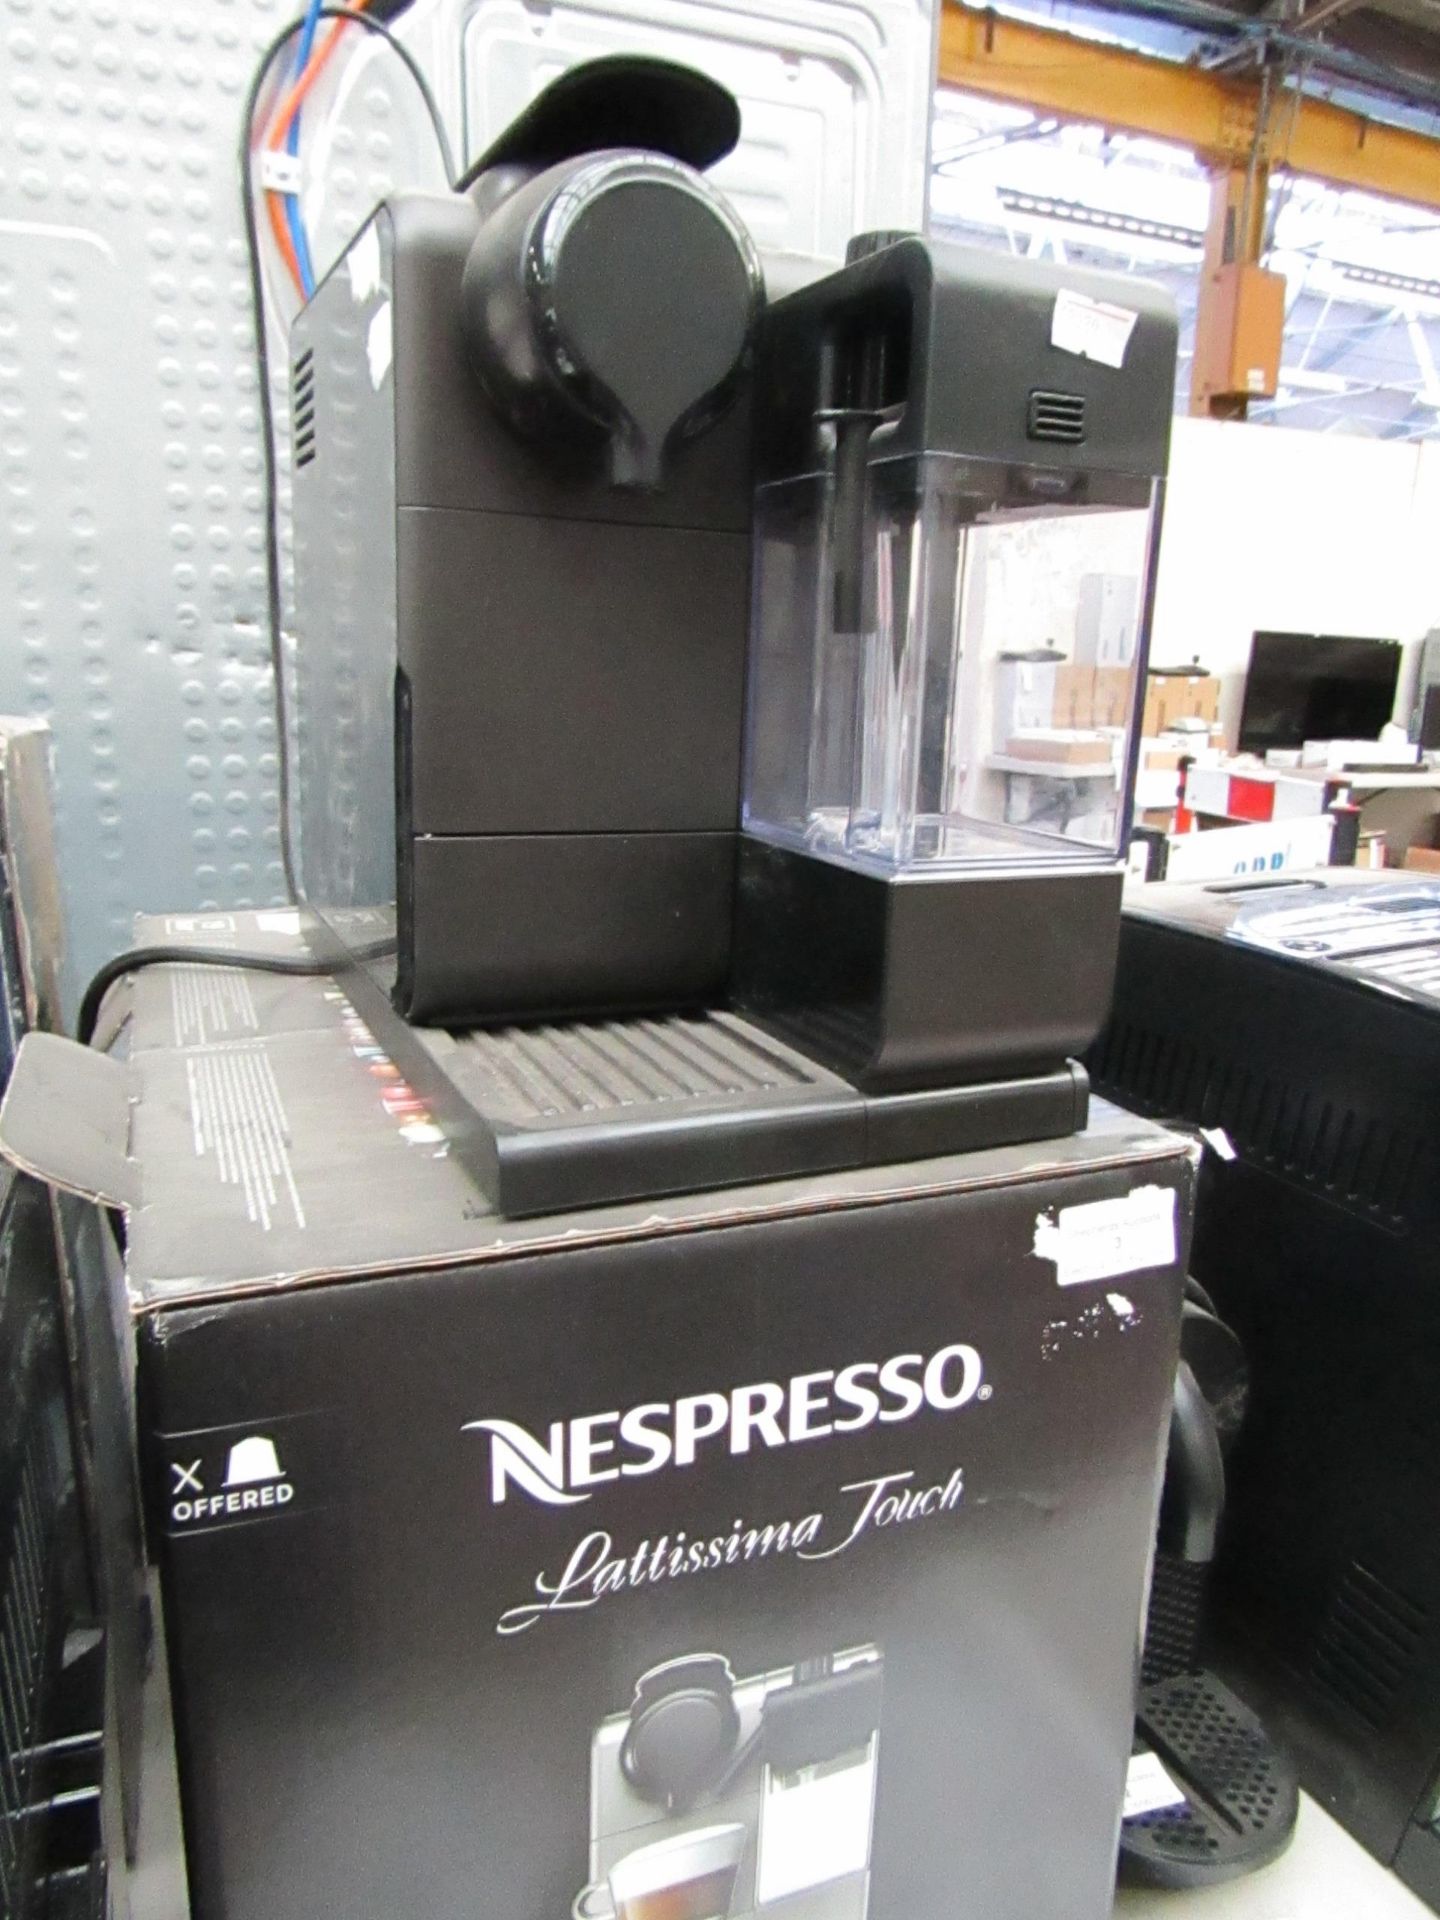 Nespresso Delonghi coffee machine, boxed and powers on.